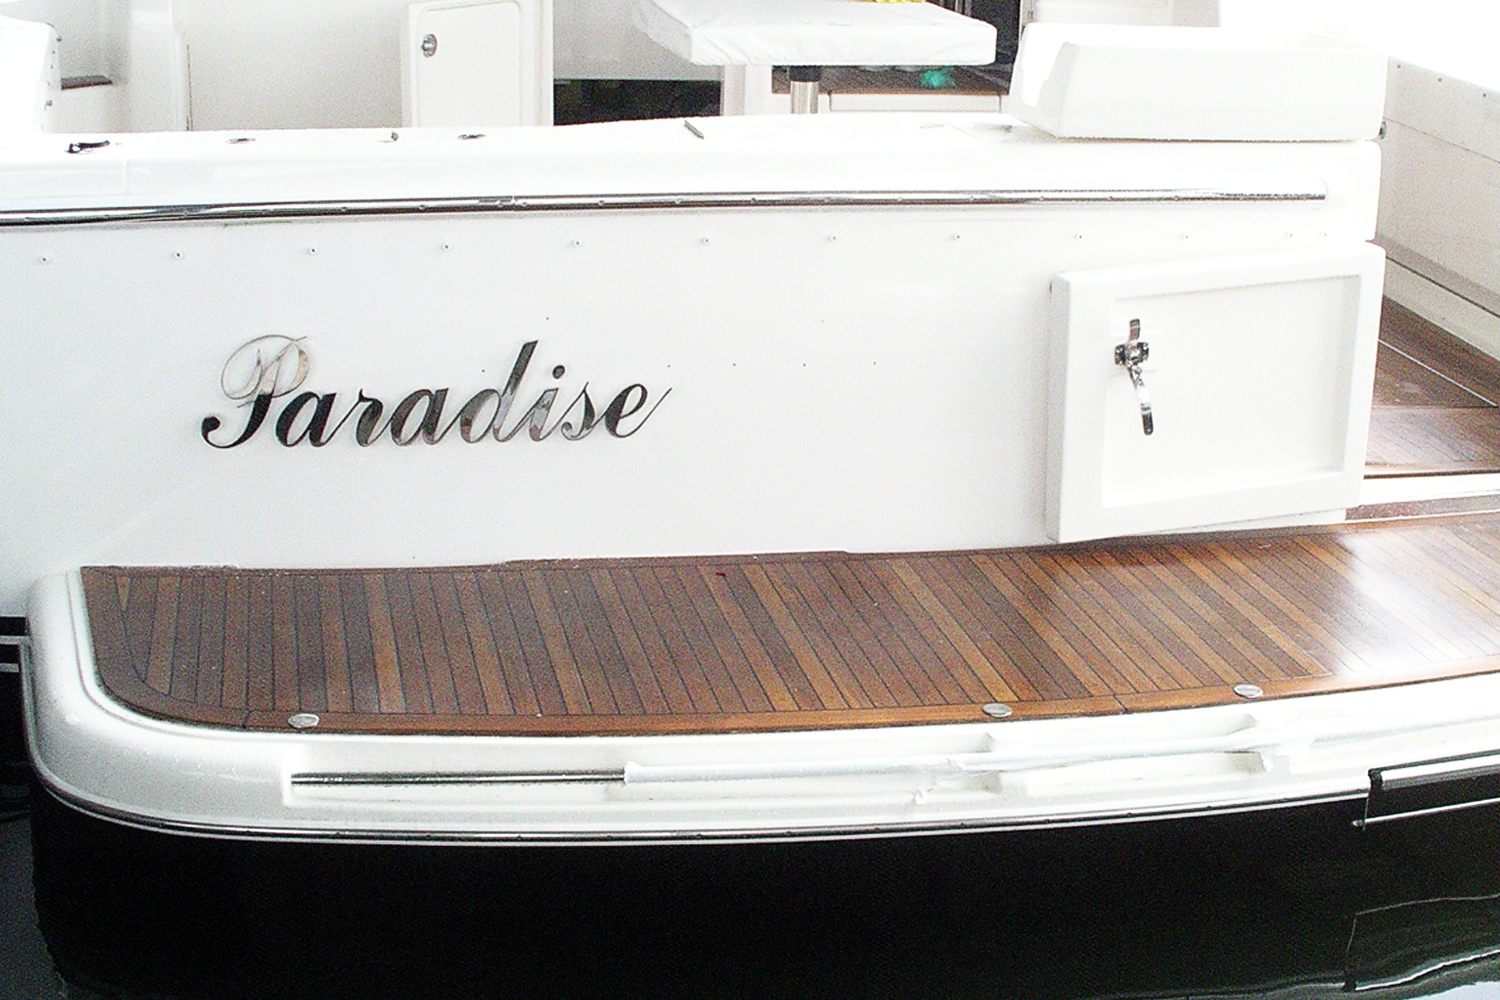 Stainless boat name and lettering